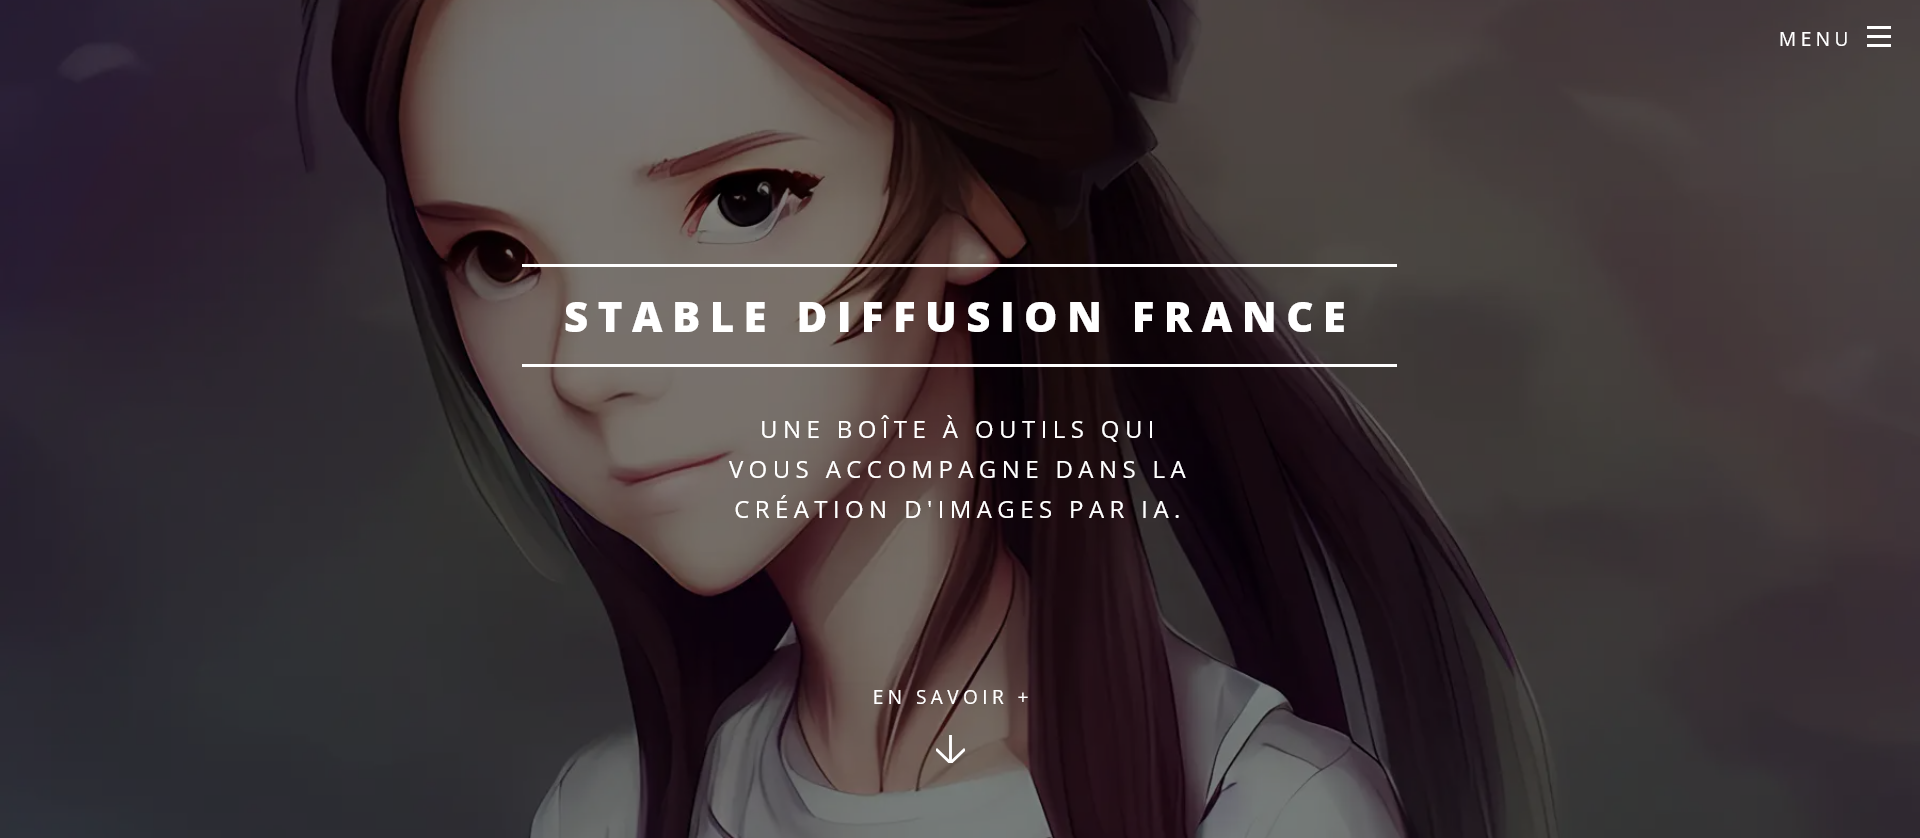 Stable diffusion france